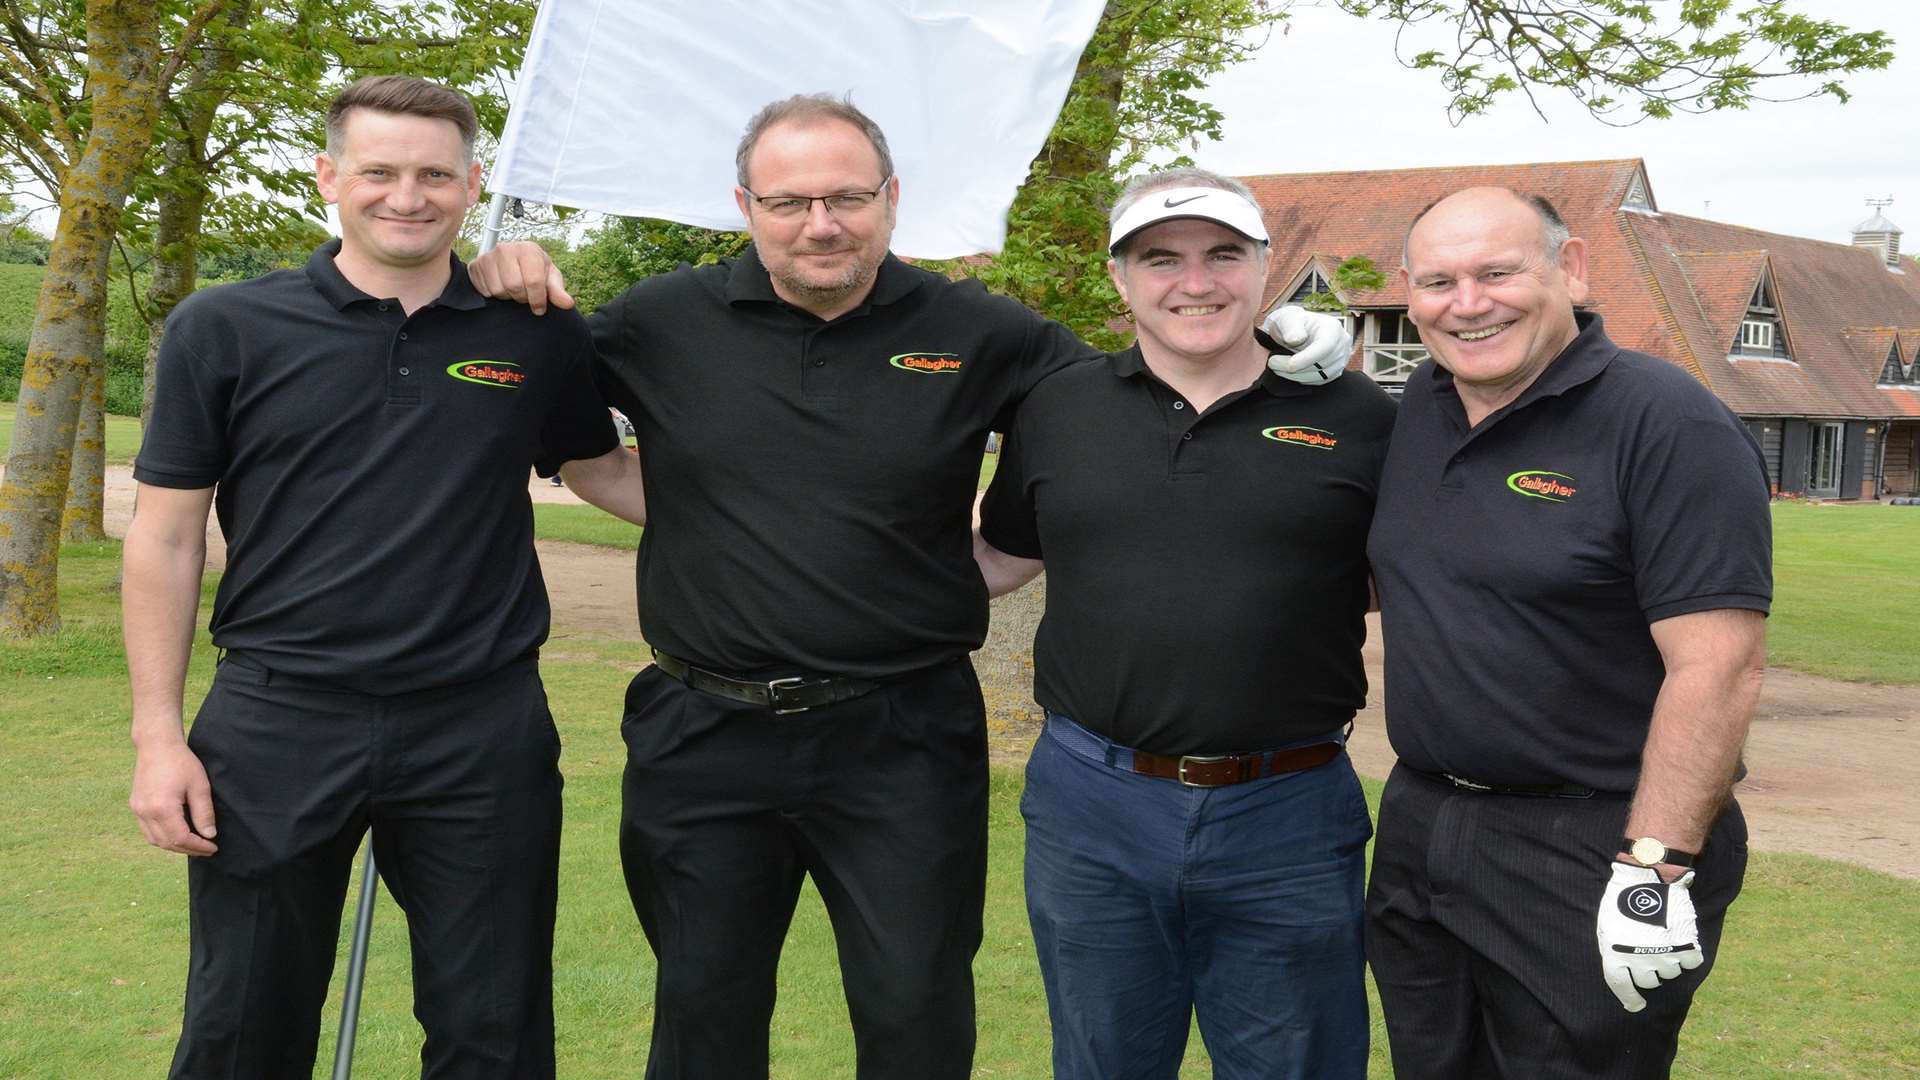 Sean Connor, Stuart Courter, Paul D’Arcy and Mick Hook of Gallaghers Aggregates at the KM Charity Golf Challenge 2016 staged at Boughton Golf Club On Friday, May 20.